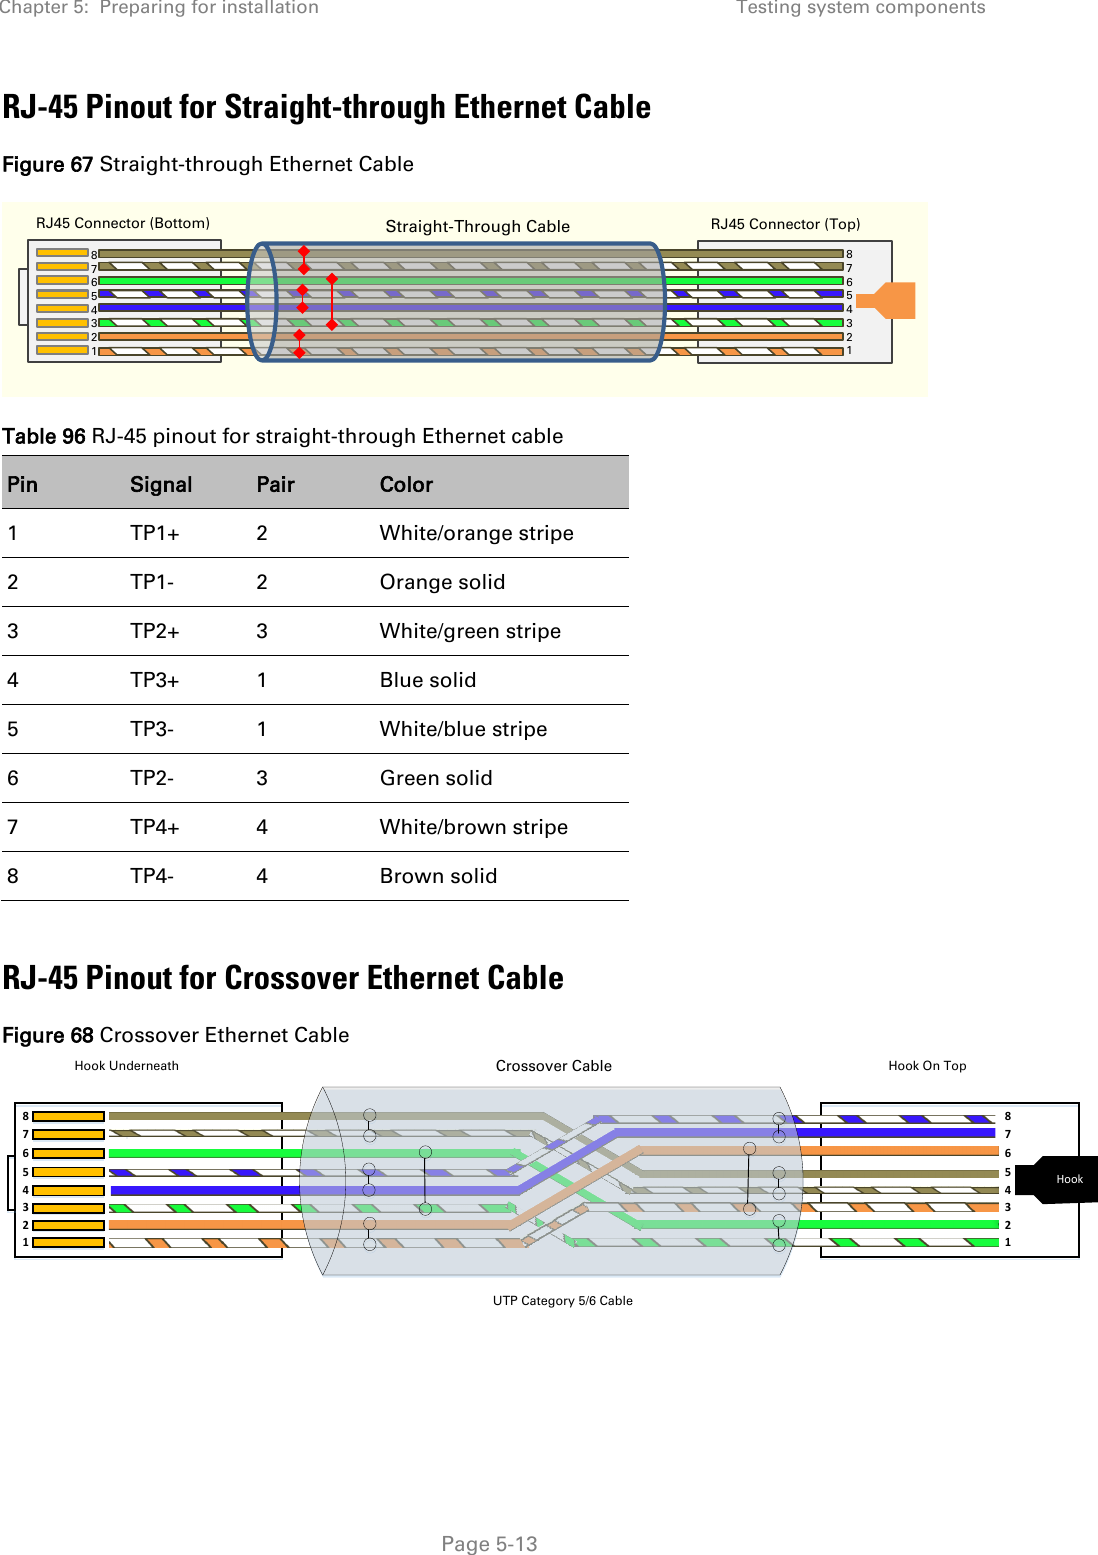 Chapter 5:  Preparing for installation Testing system components   Page 5-13 RJ-45 Pinout for Straight-through Ethernet Cable Figure 67 Straight-through Ethernet Cable  Table 96 RJ-45 pinout for straight-through Ethernet cable Pin Signal Pair Color 1  TP1+  2  White/orange stripe 2  TP1-  2  Orange solid 3  TP2+  3  White/green stripe 4  TP3+  1  Blue solid 5  TP3-  1  White/blue stripe 6  TP2-  3  Green solid 7  TP4+  4  White/brown stripe 8  TP4-  4  Brown solid  RJ-45 Pinout for Crossover Ethernet Cable Figure 68 Crossover Ethernet Cable 1324567813245678HookHook Underneath Hook On TopCrossover CableUTP Category 5/6 Cable   `` RJ45 Connector (Bottom) Straight-Through Cable  RJ45 Connector (Top) 8     7 6 5 4 3 2 1   8     7 6 5 4 3 2 1   